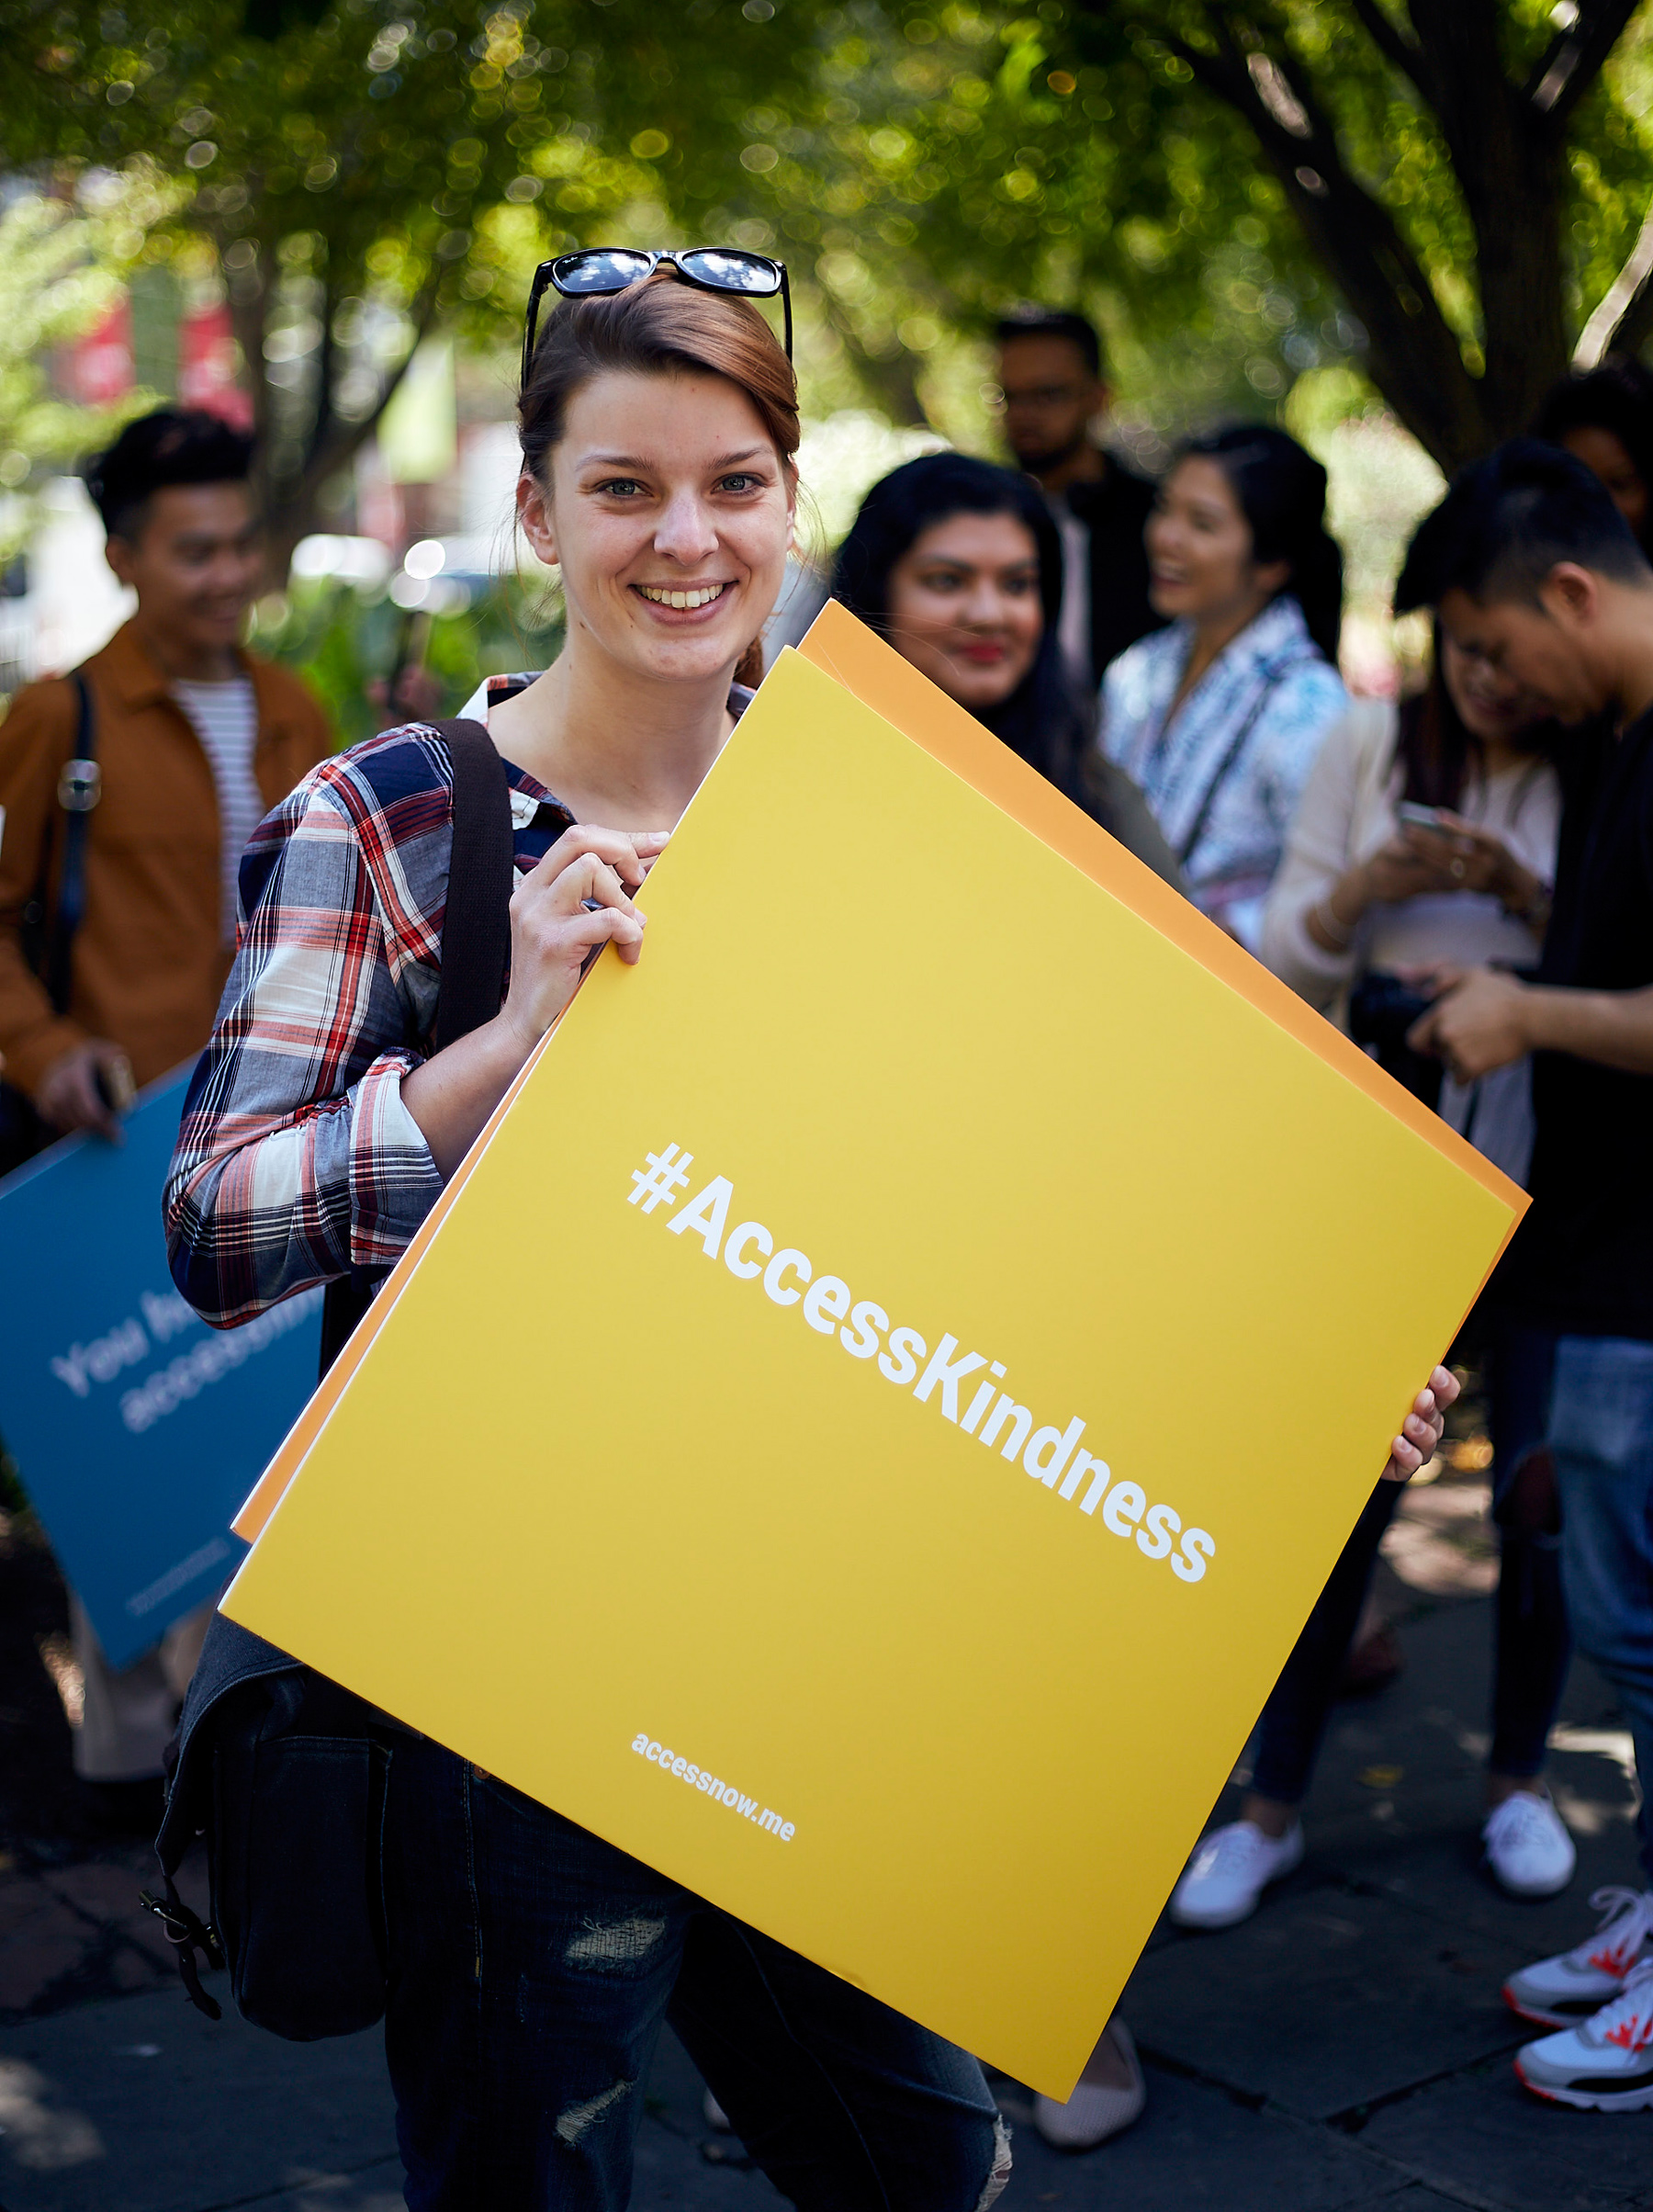 photo of young woman smiling as she holds up a yellow sign that reads "Access Kindness" in bold 